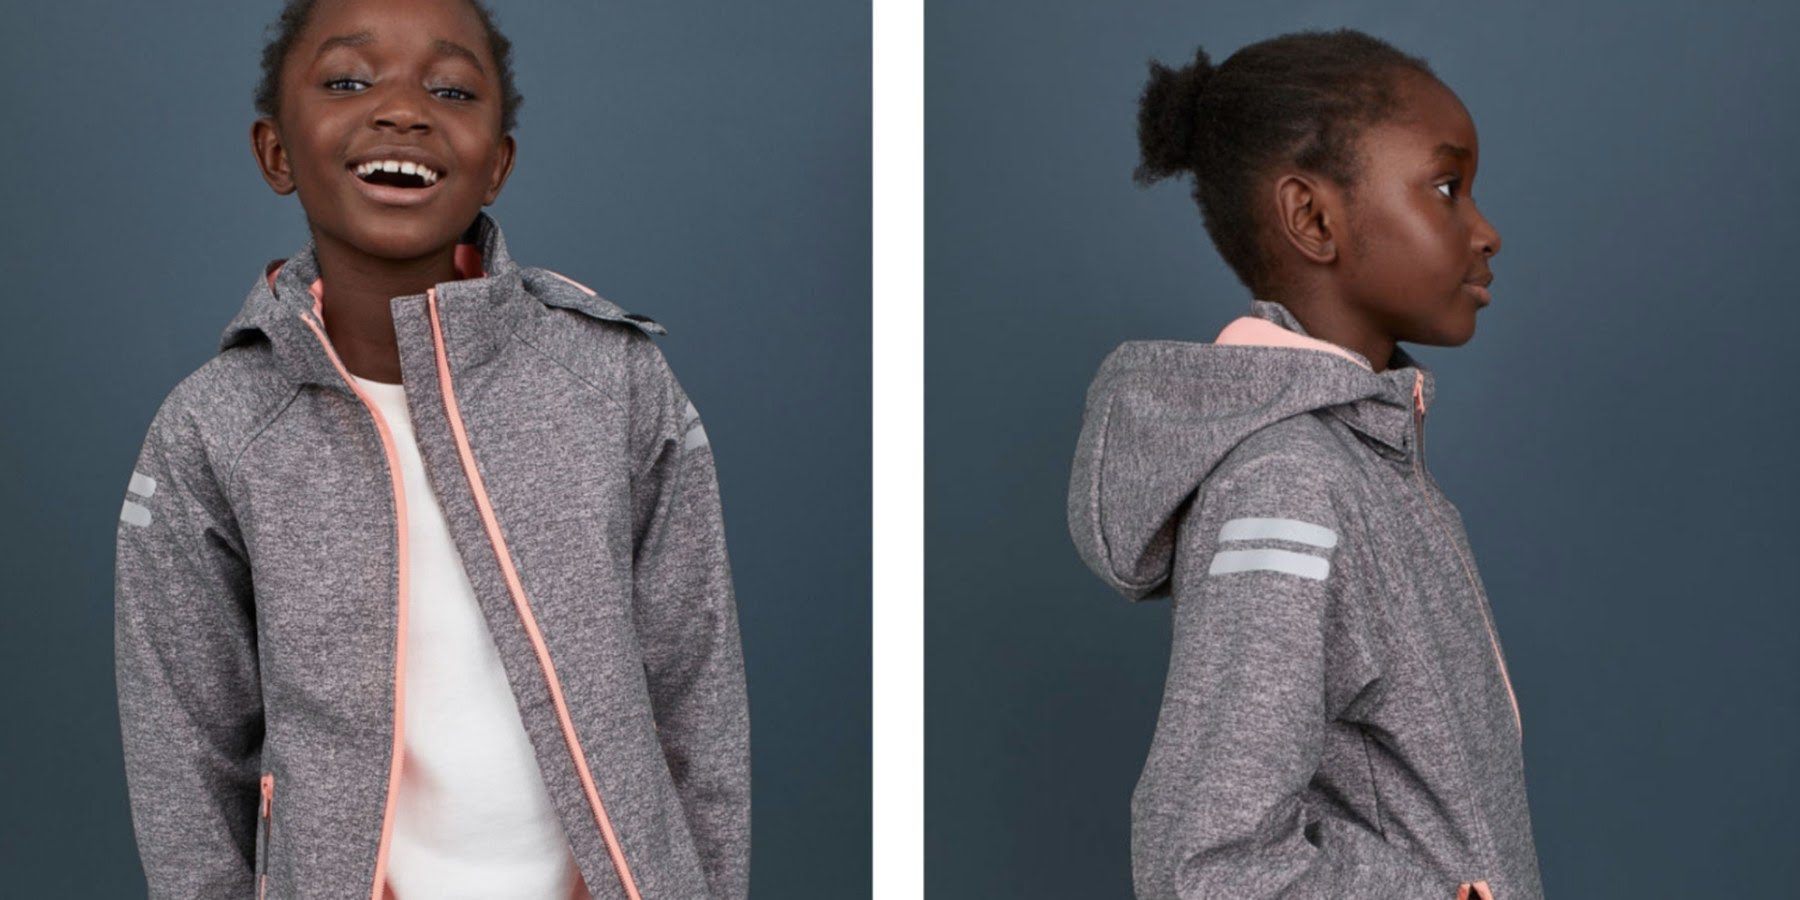 African American community hits at H&M again over child’s uncombed hair